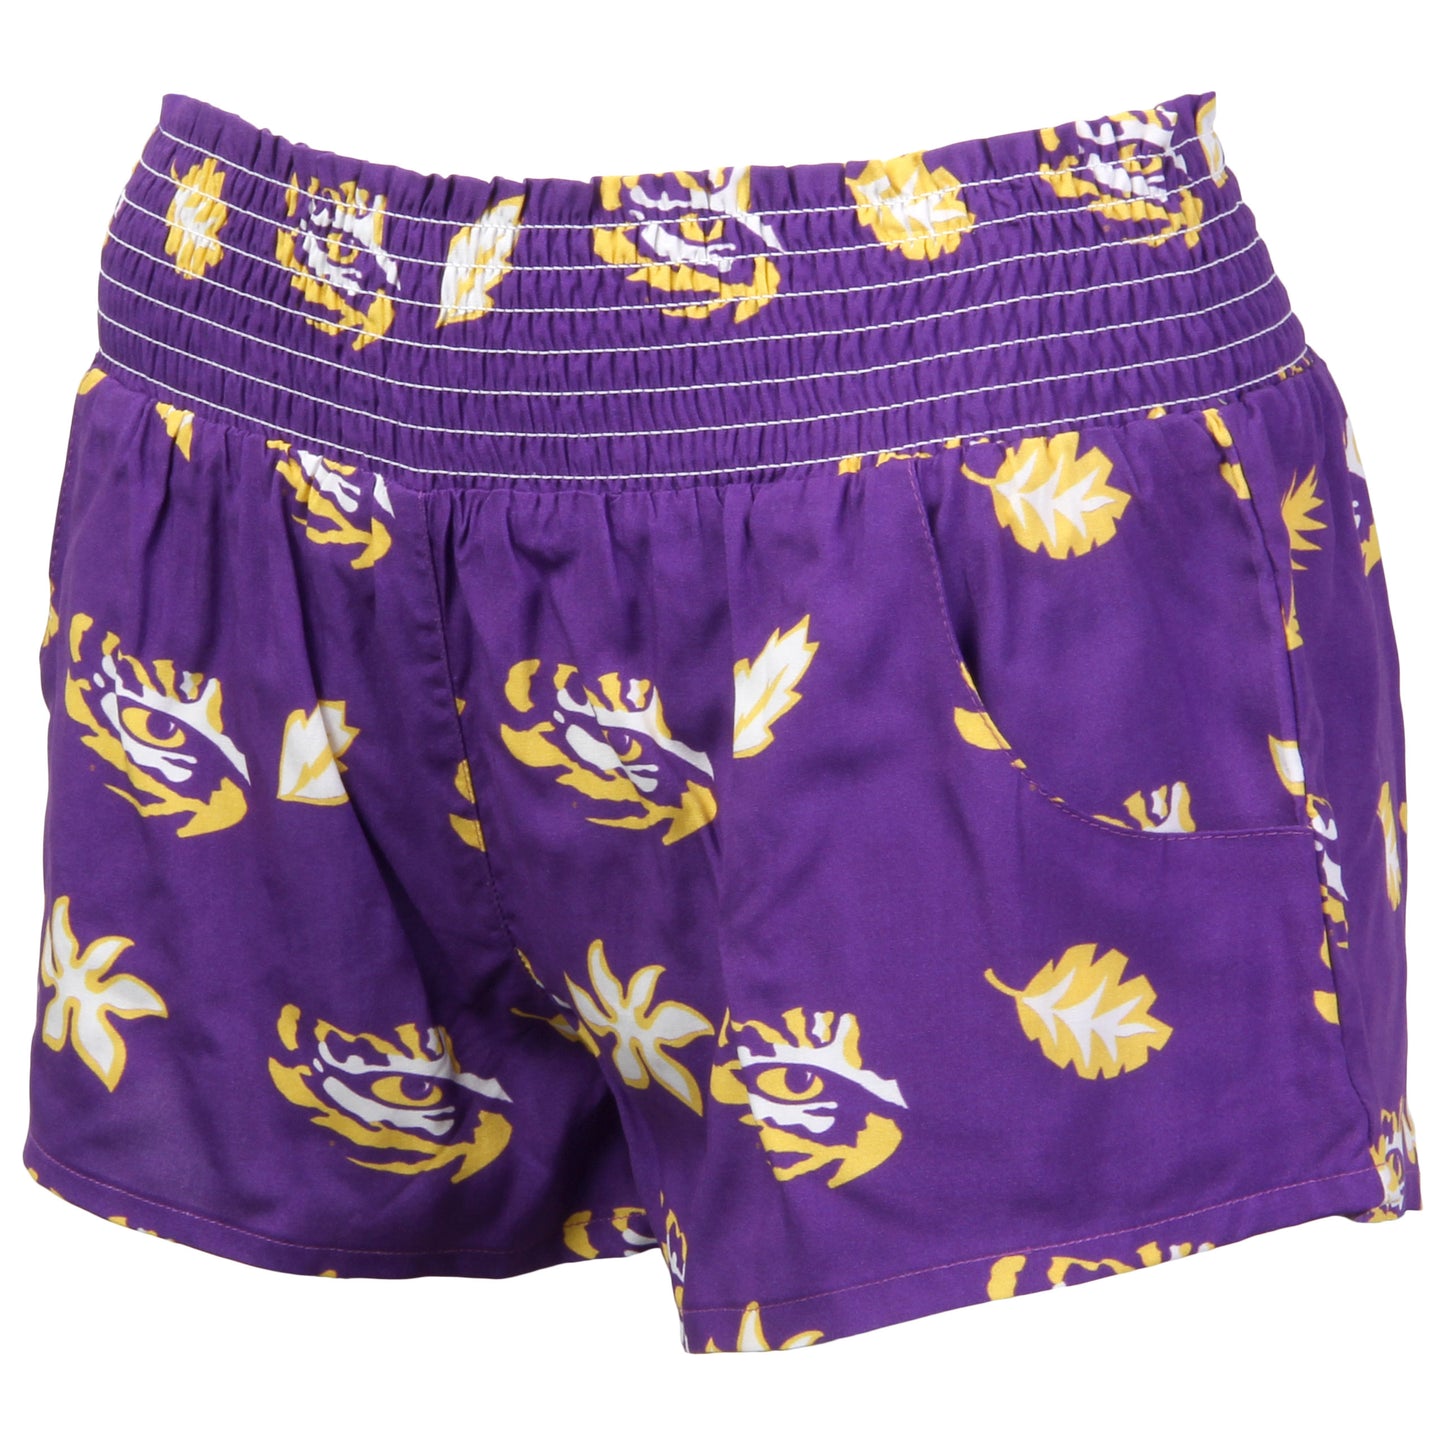 Wes and Willy LSU Tigers Women's Beach Short